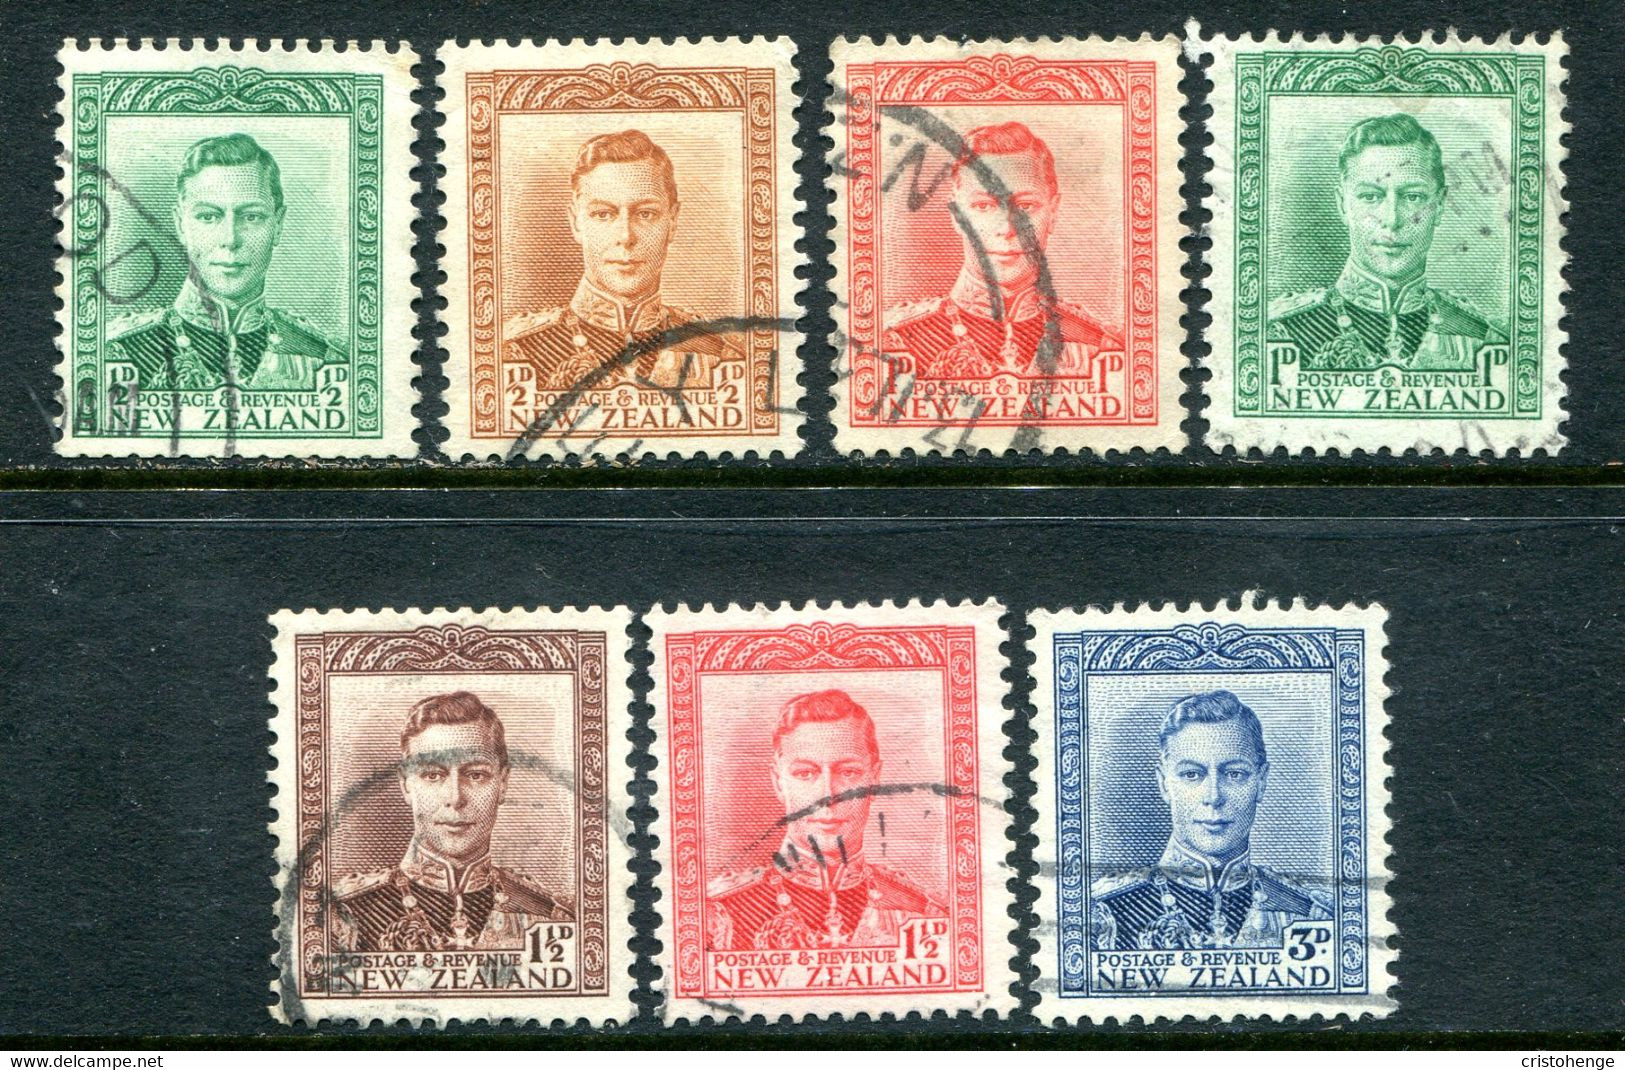 New Zealand 1938-44 King George VI Definitives Set Used (SG 603-609) - Used Stamps